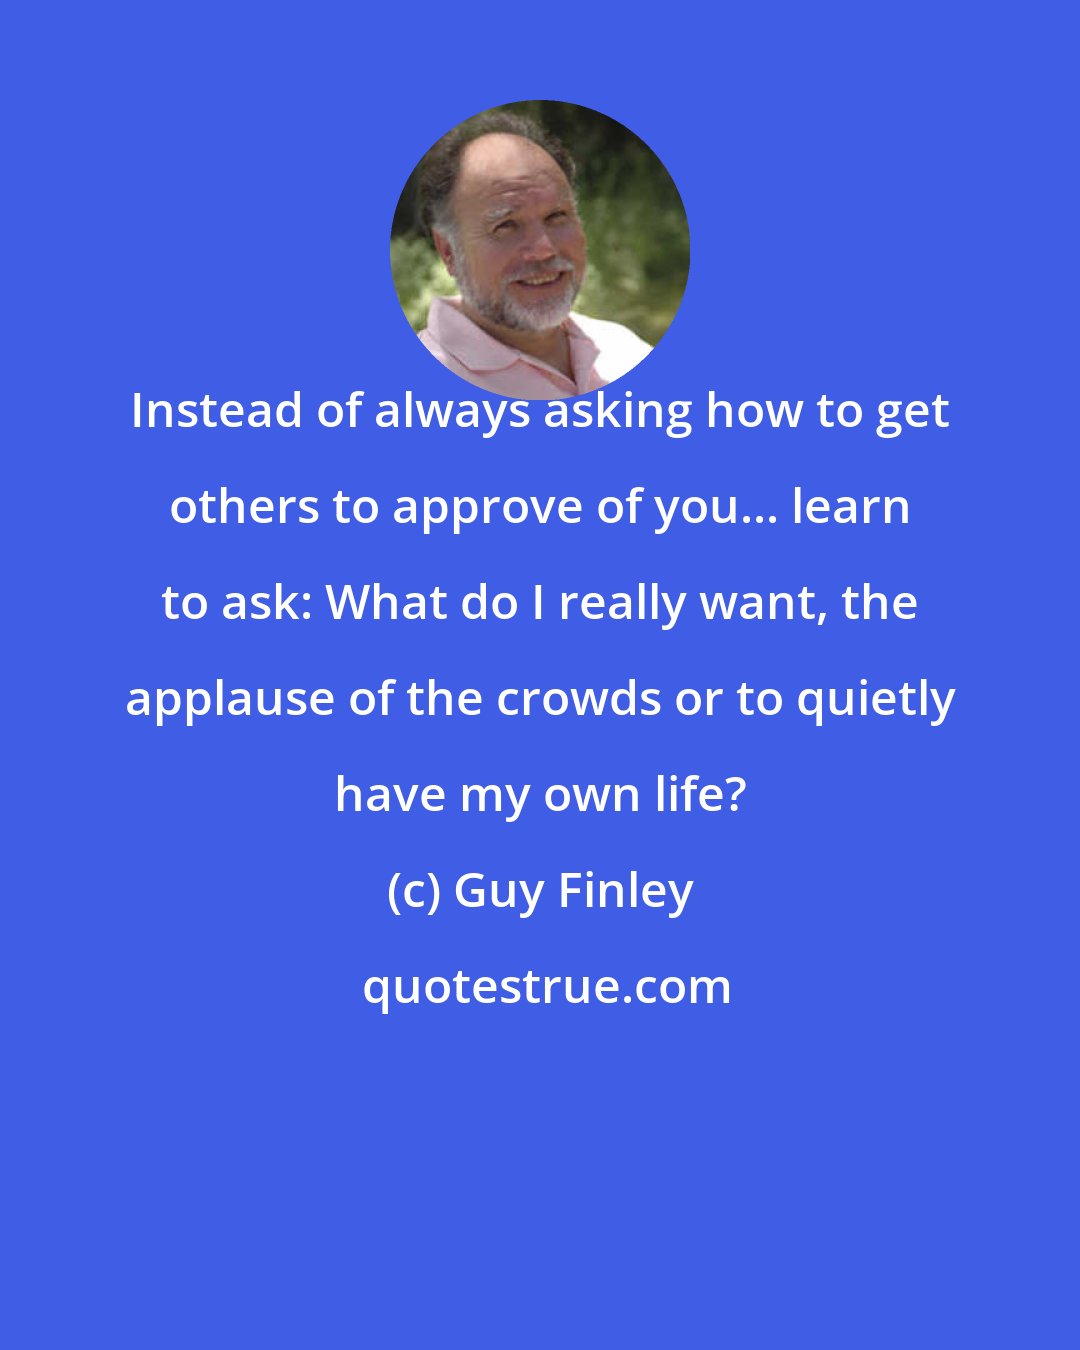 Guy Finley: Instead of always asking how to get others to approve of you... learn to ask: What do I really want, the applause of the crowds or to quietly have my own life?